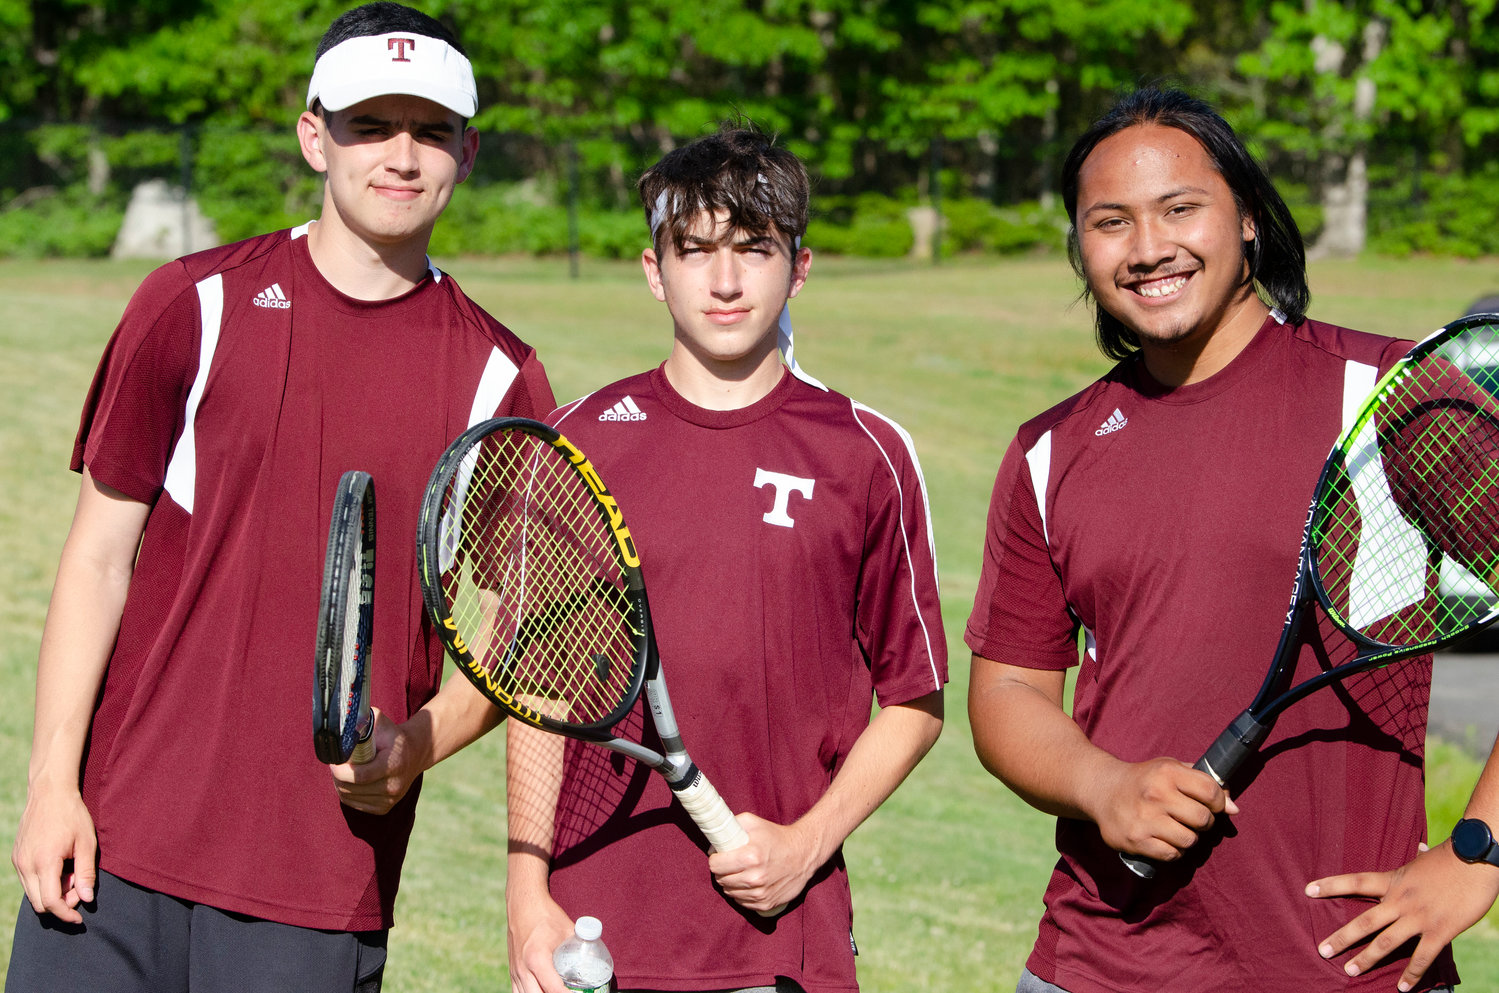 Second doubles team, Tim borden (left) and Jarred Rogers pose with teammate Fred Bebe.